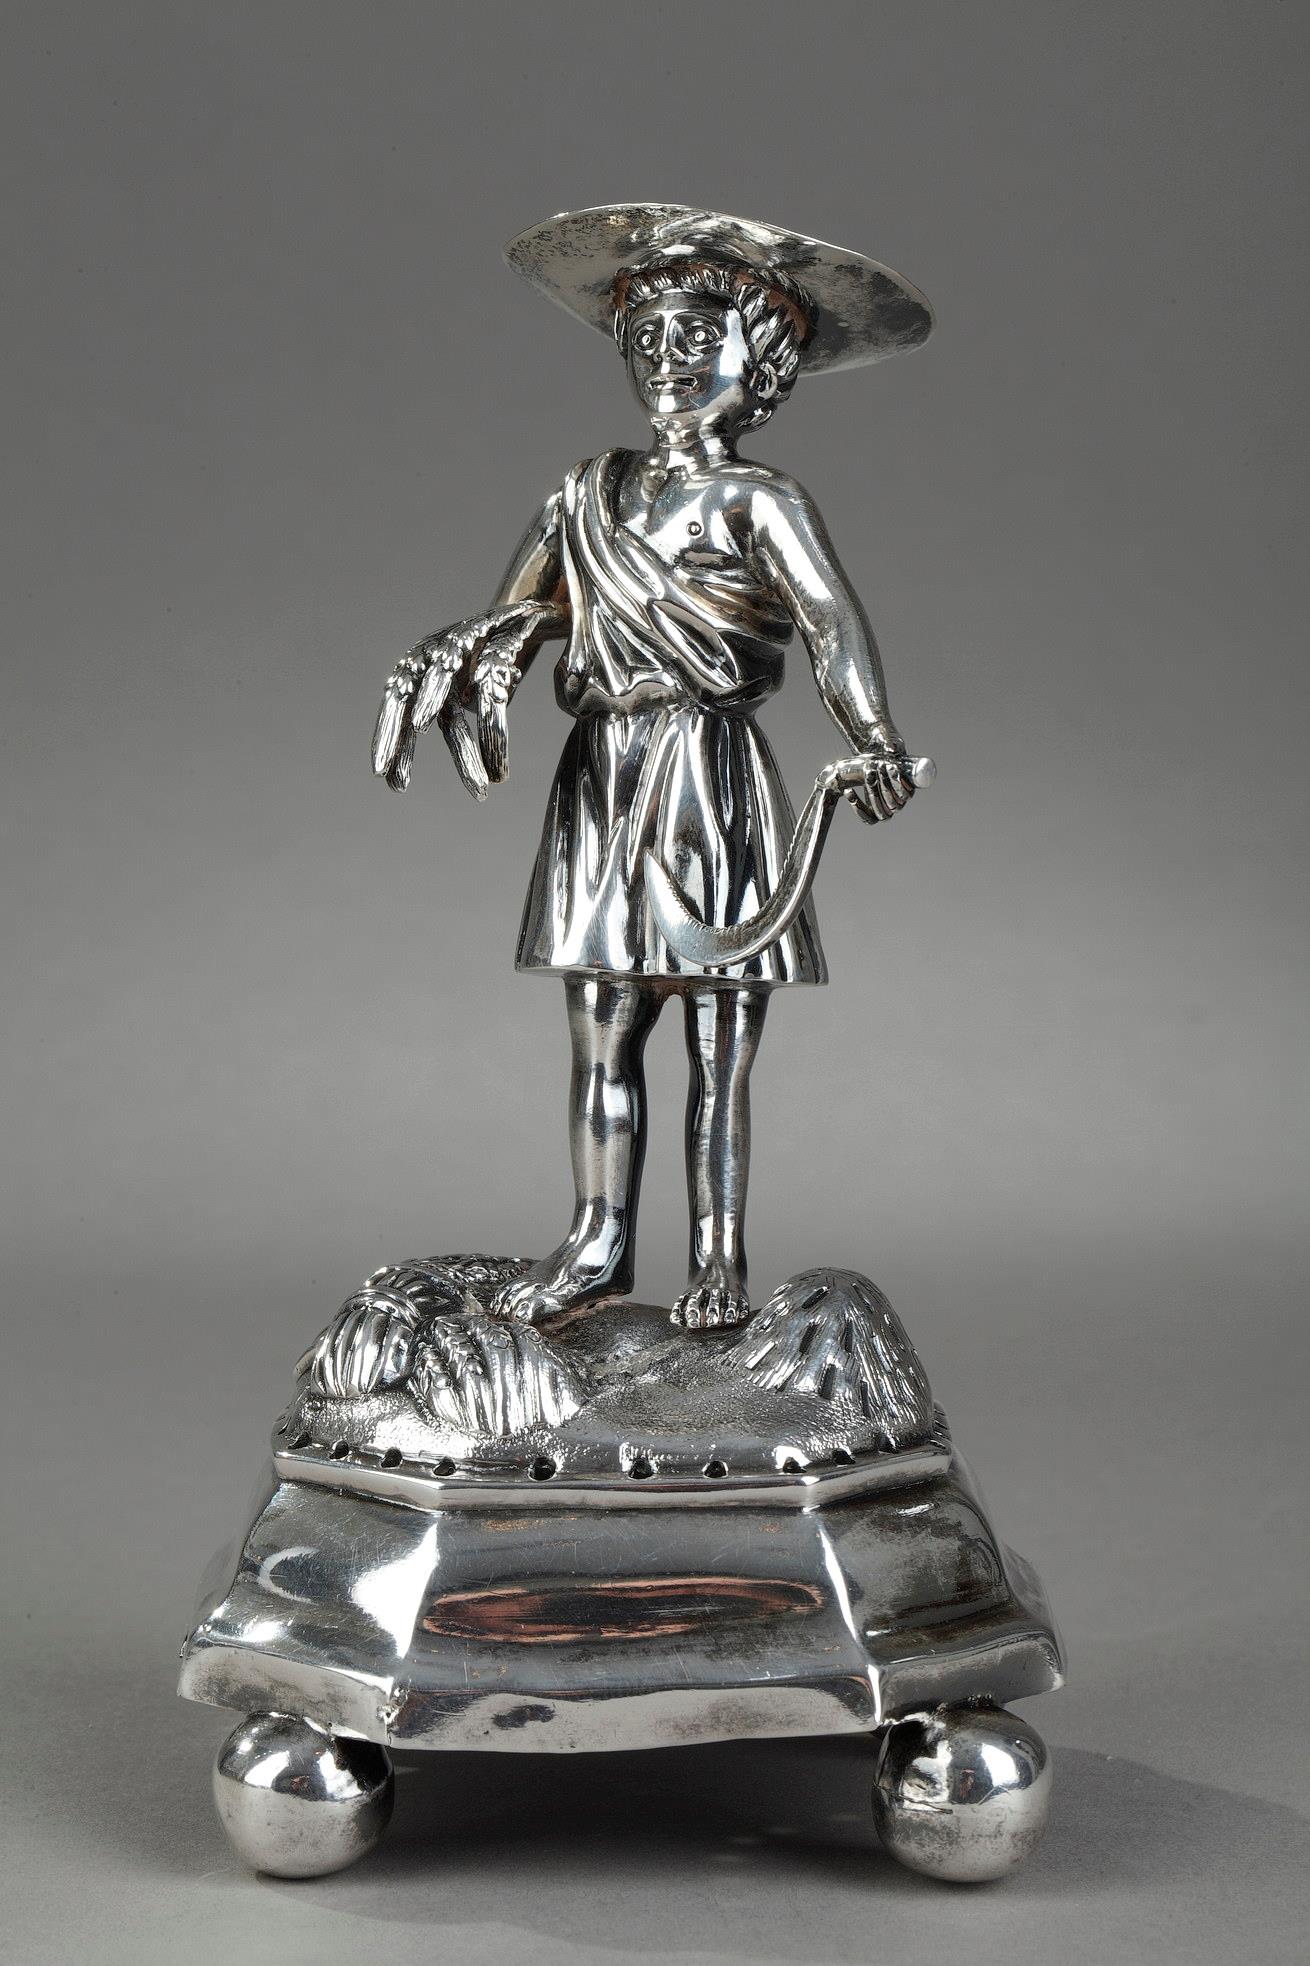 Mid-19th century Portuguese Silver Toothpick Holder. 